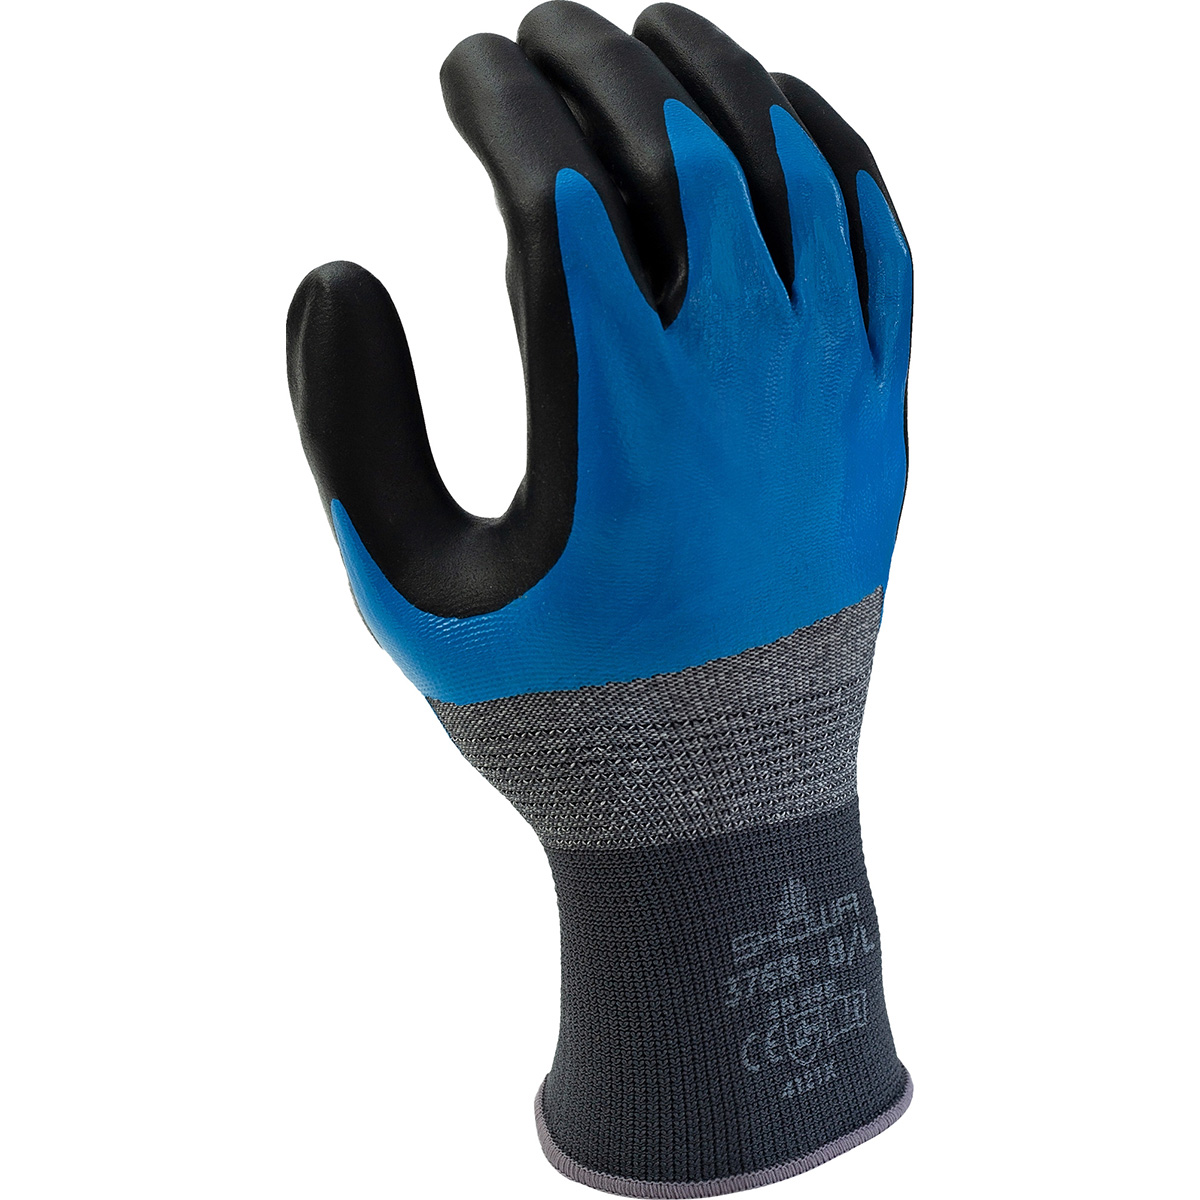 General purpose 3/4 nitrile blue undercoating w/black foamed palm coating, 13 gauge, 3/4 for over knuckle protection,  liquid resistant, seamless knitted liner, small